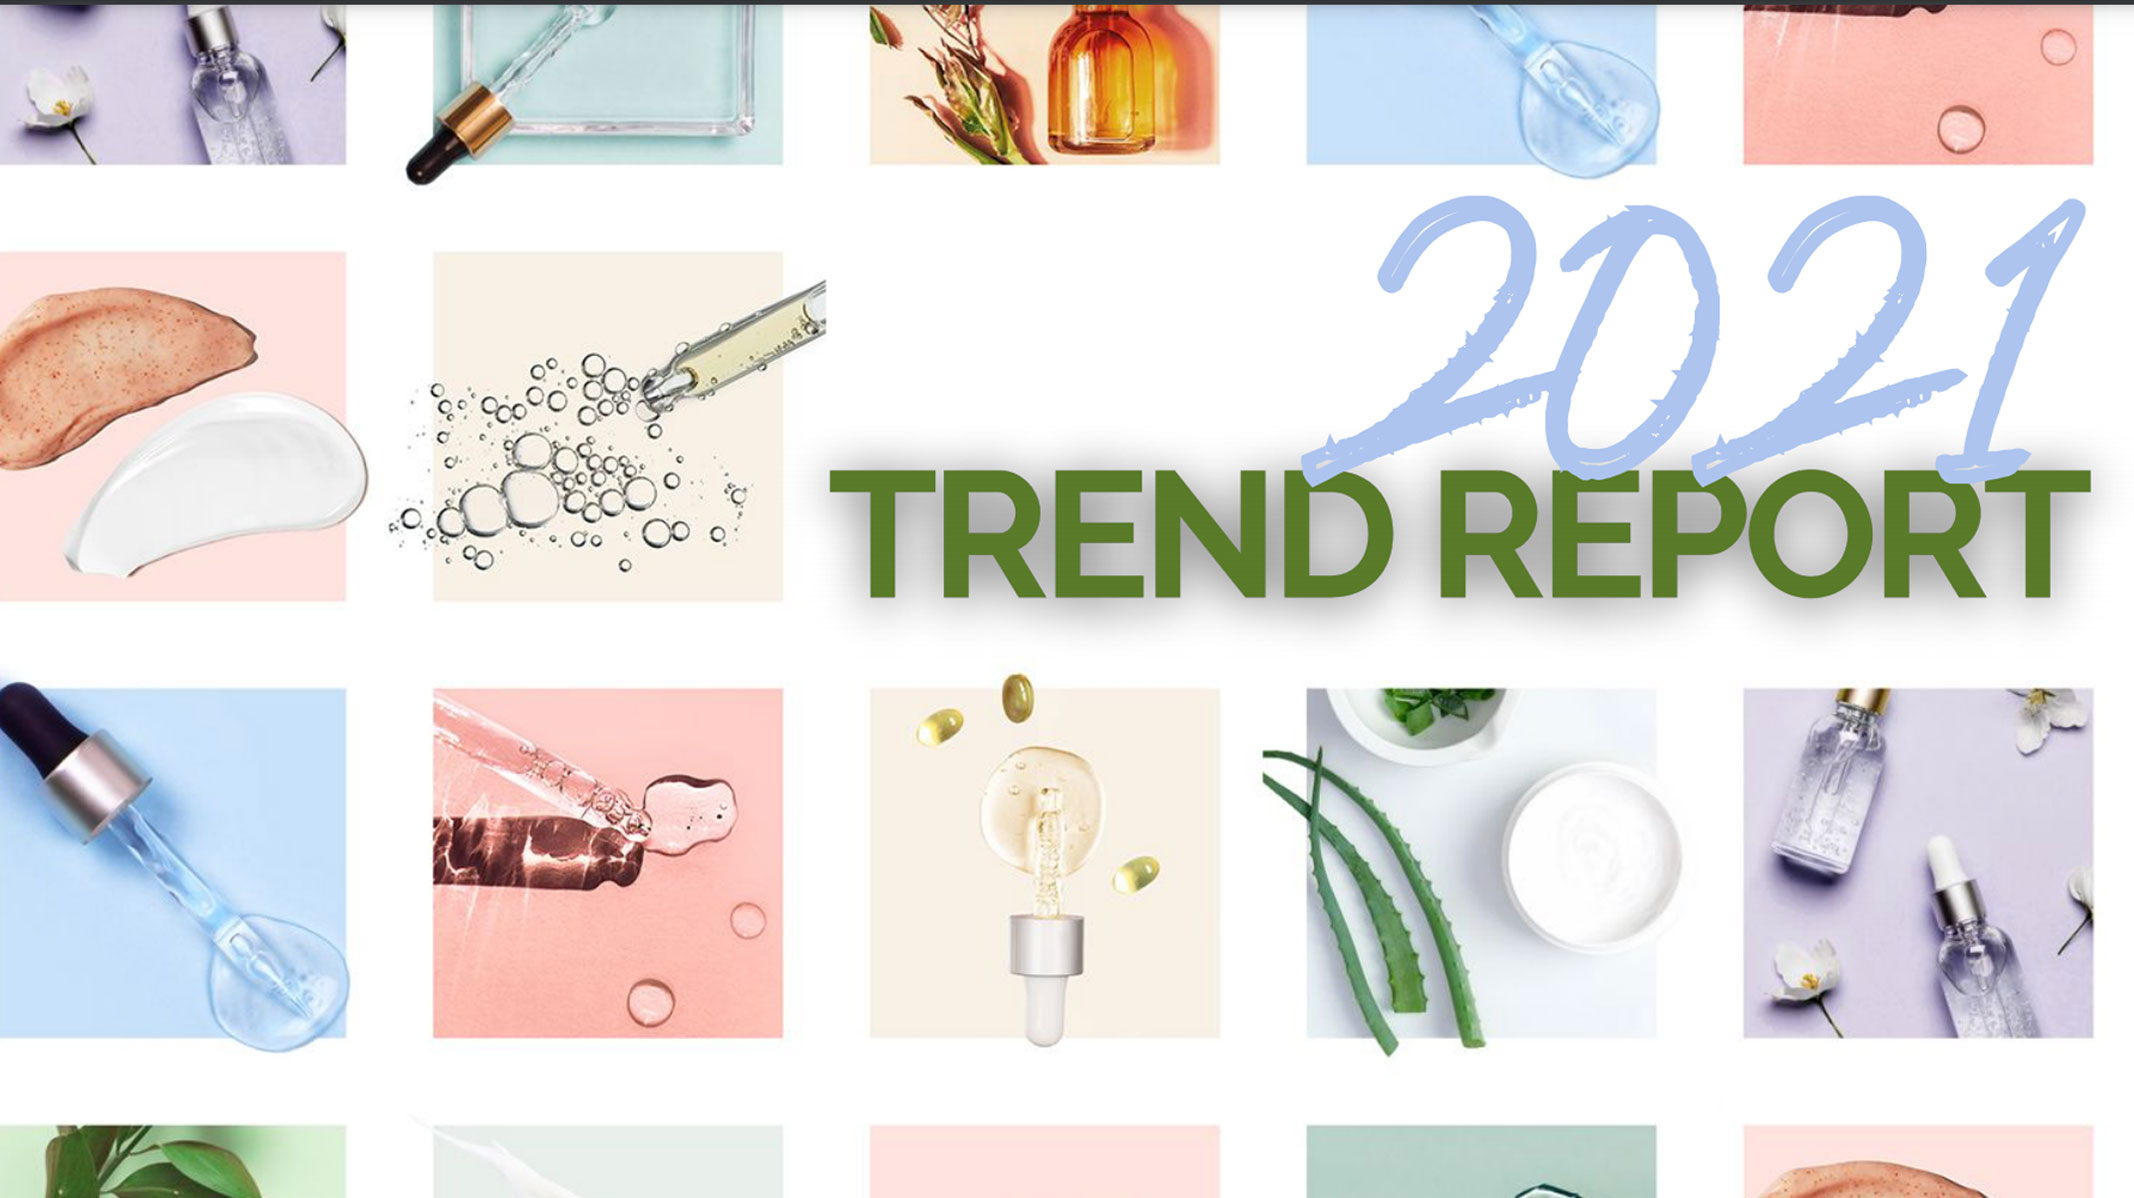 Trend Reports image for 2021 Consumer Trend Reports